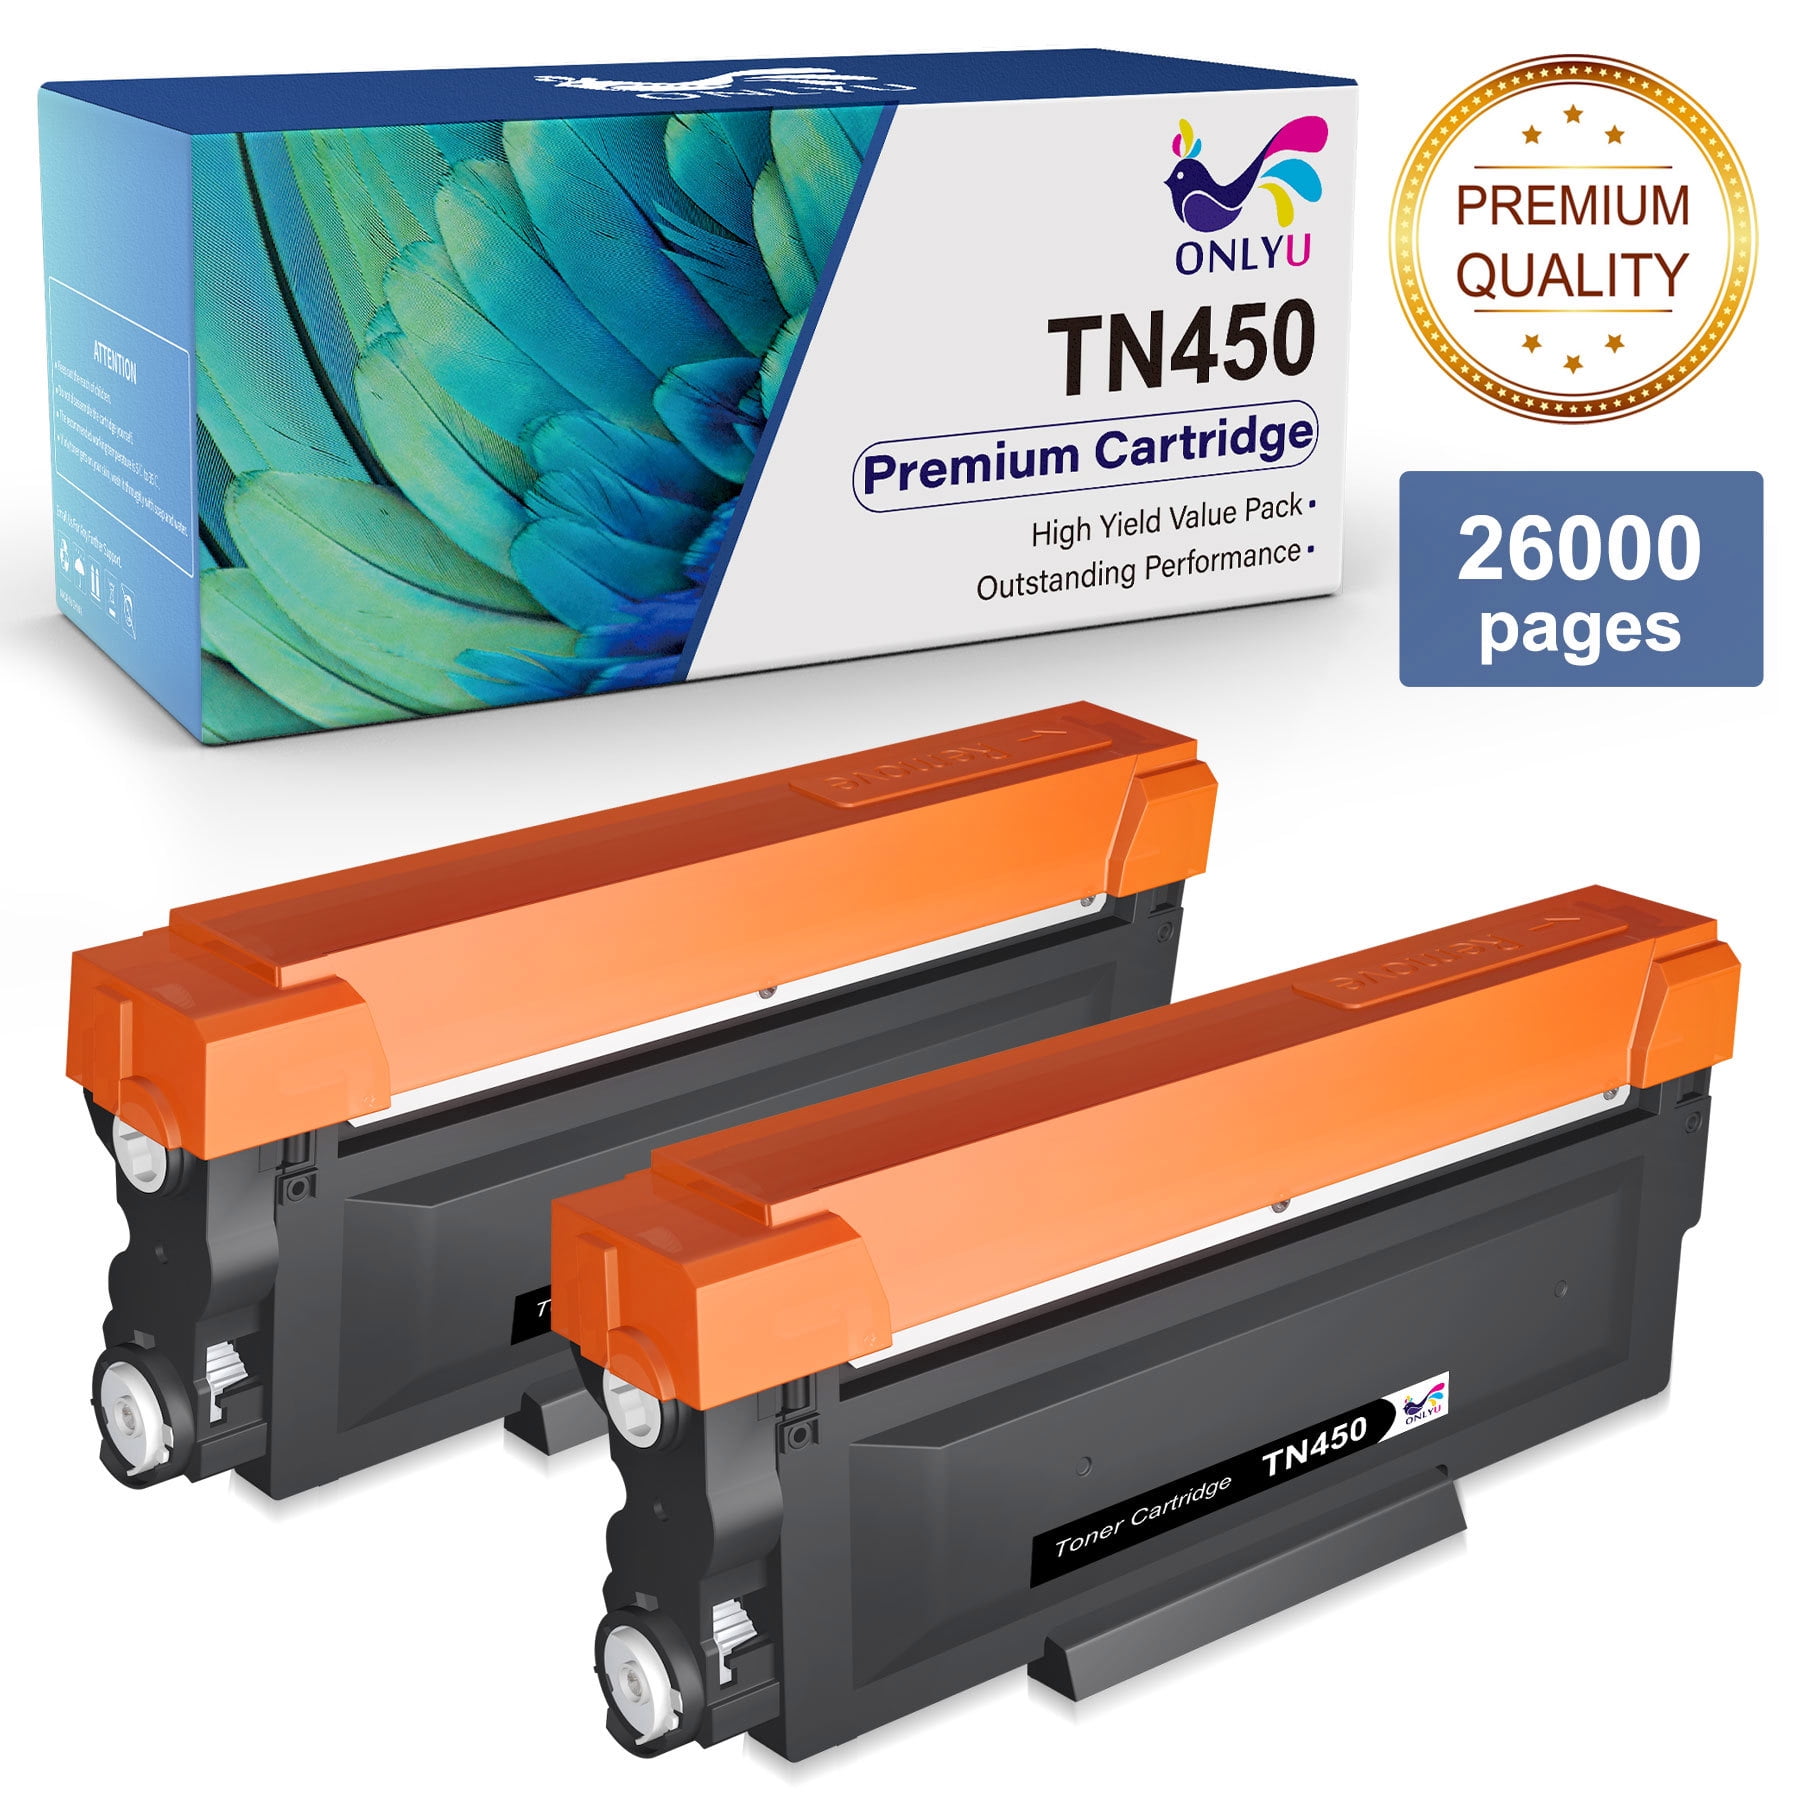 TN-450 Compatible for Brother TN450 TN-450 TN420 Toner Replacement to with HL-2270DW HL-2280DW HL-2240 DCP-7065DN MFC7860DW 2840 2940 Printer(2 Black) - Walmart.com